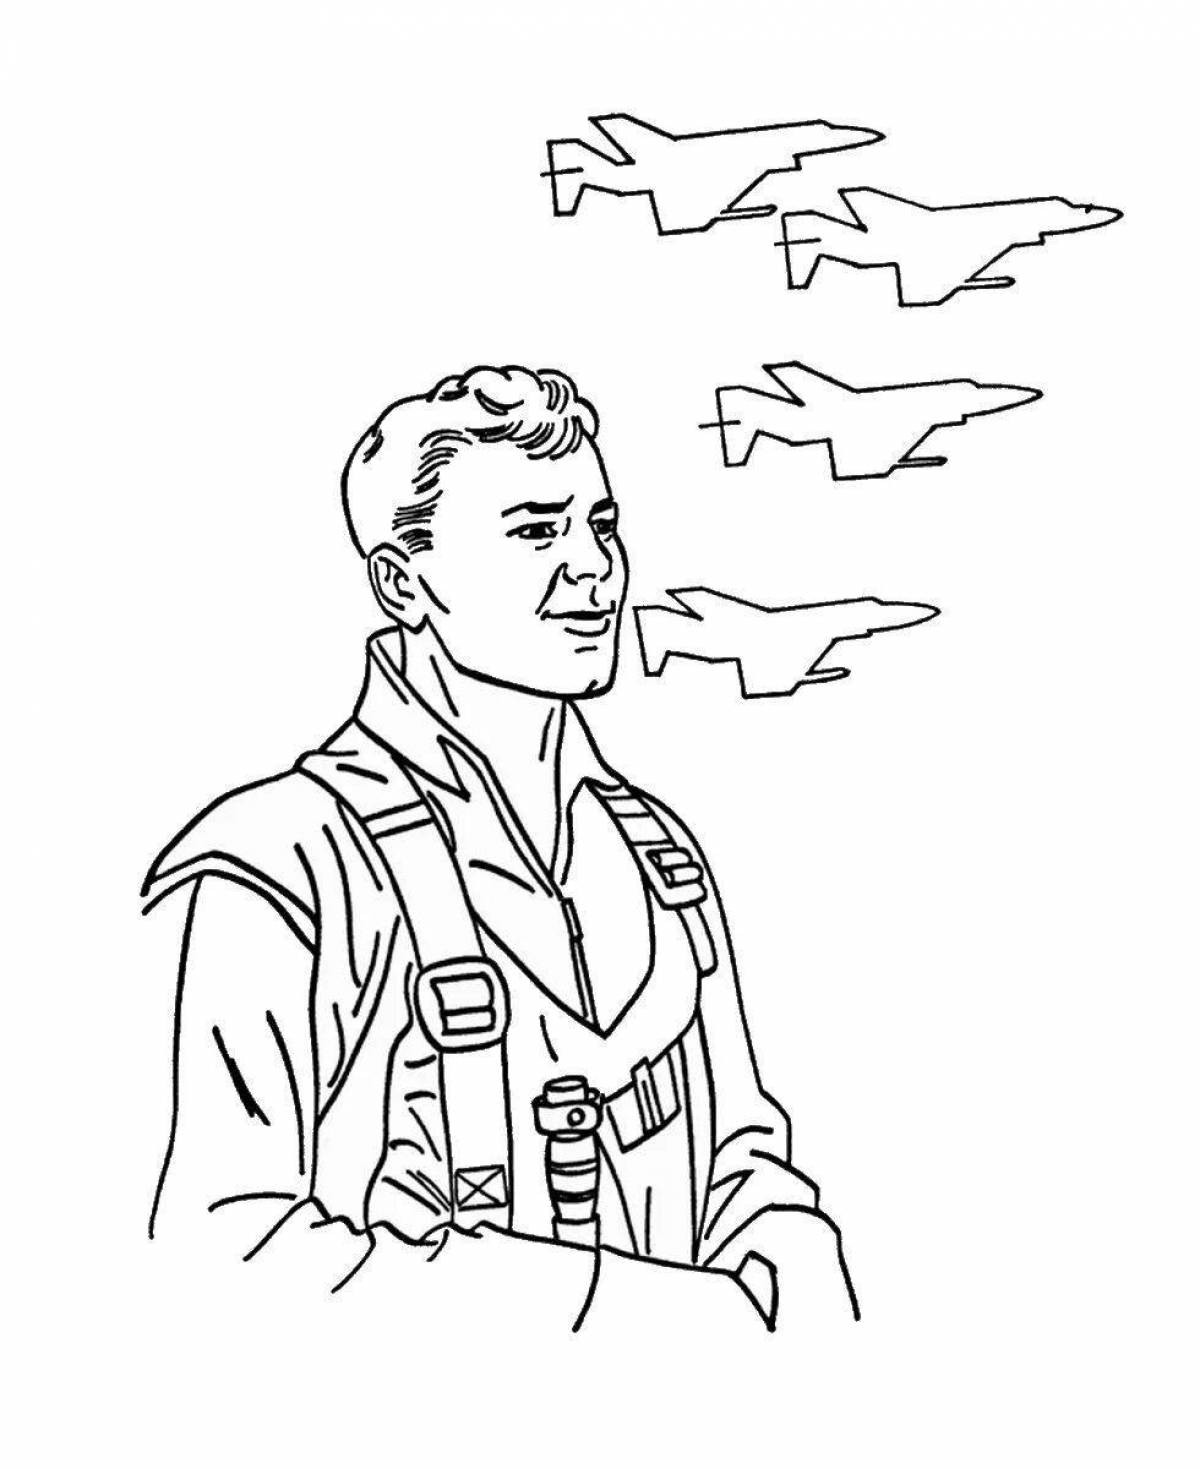 Experienced pilot coloring page